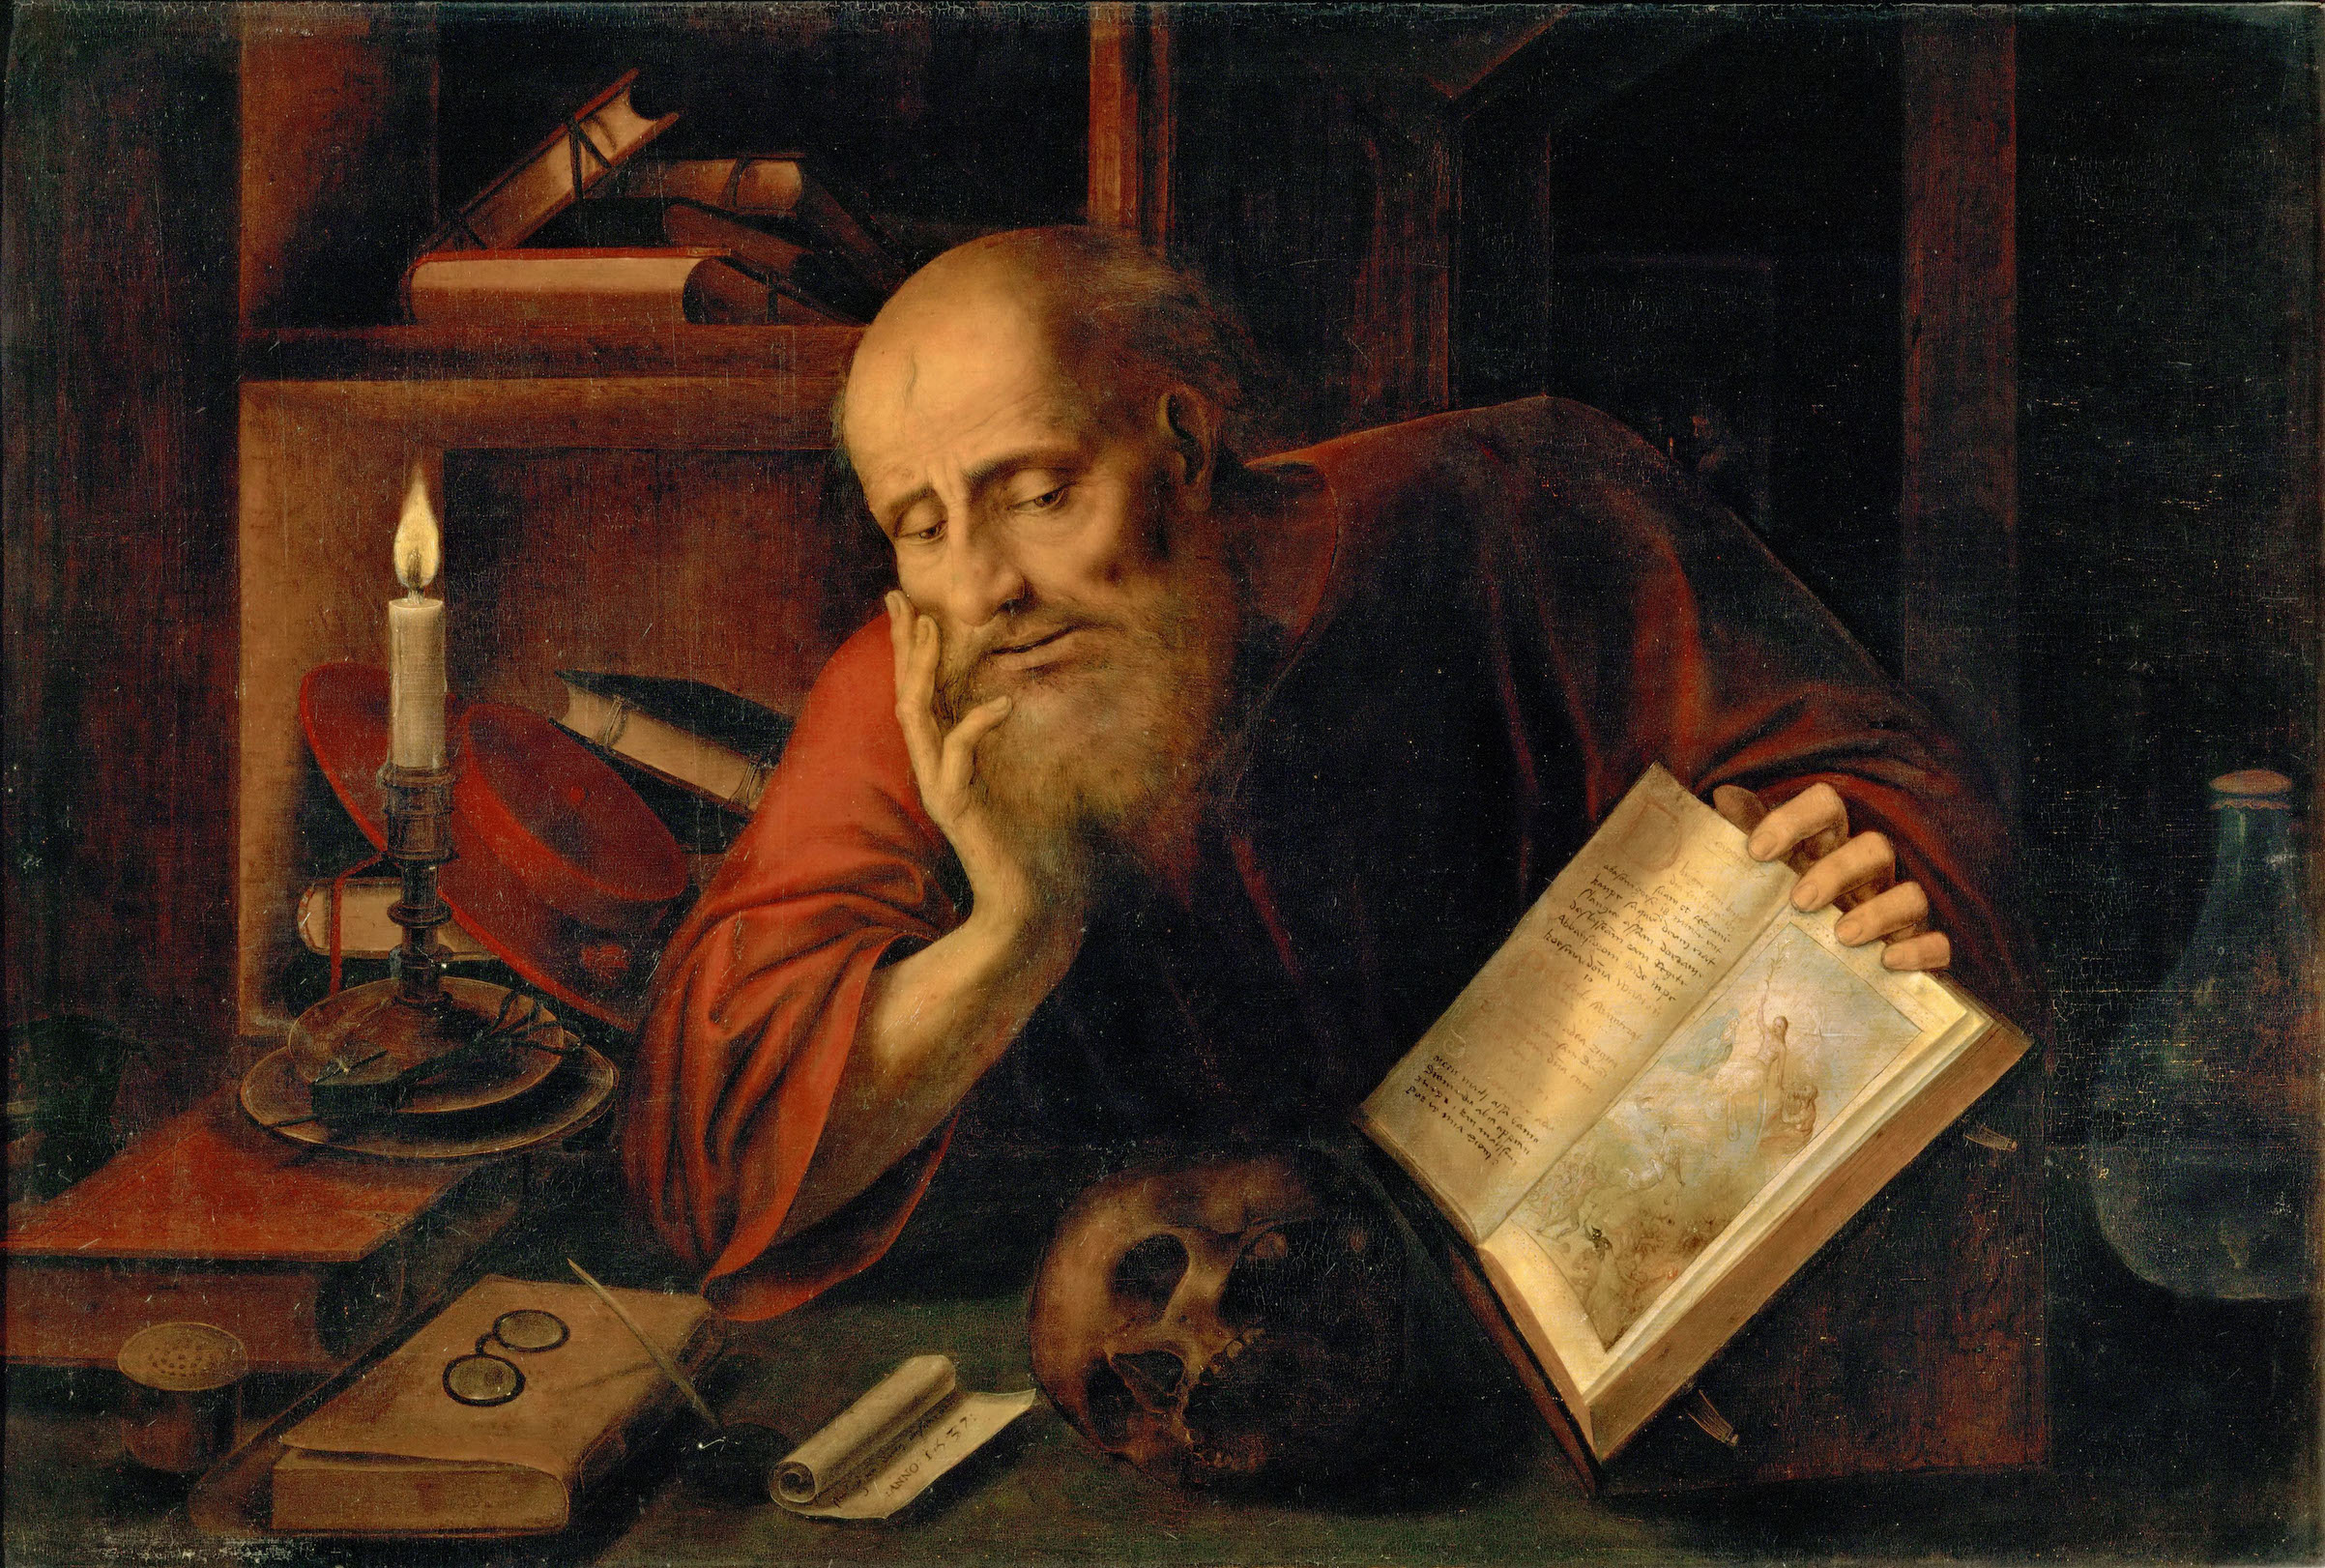 Saint Jerome, 1537. Found in the Collection of Art History Museum, Vienna. Saint Jerome spent time as a hermit. (Getty Images)